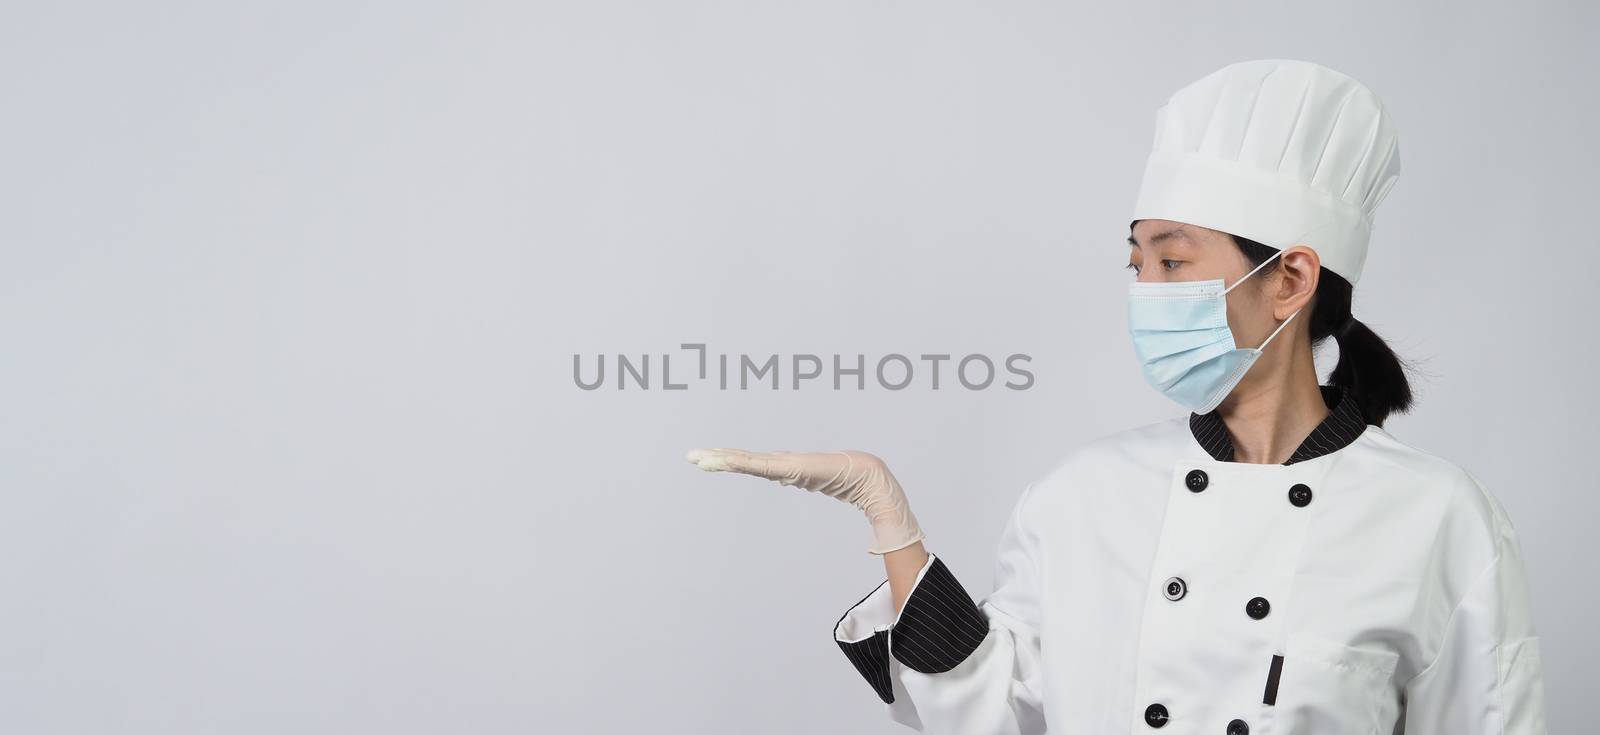 Asian woman chef in uniform with medical face mask and glove. by gnepphoto